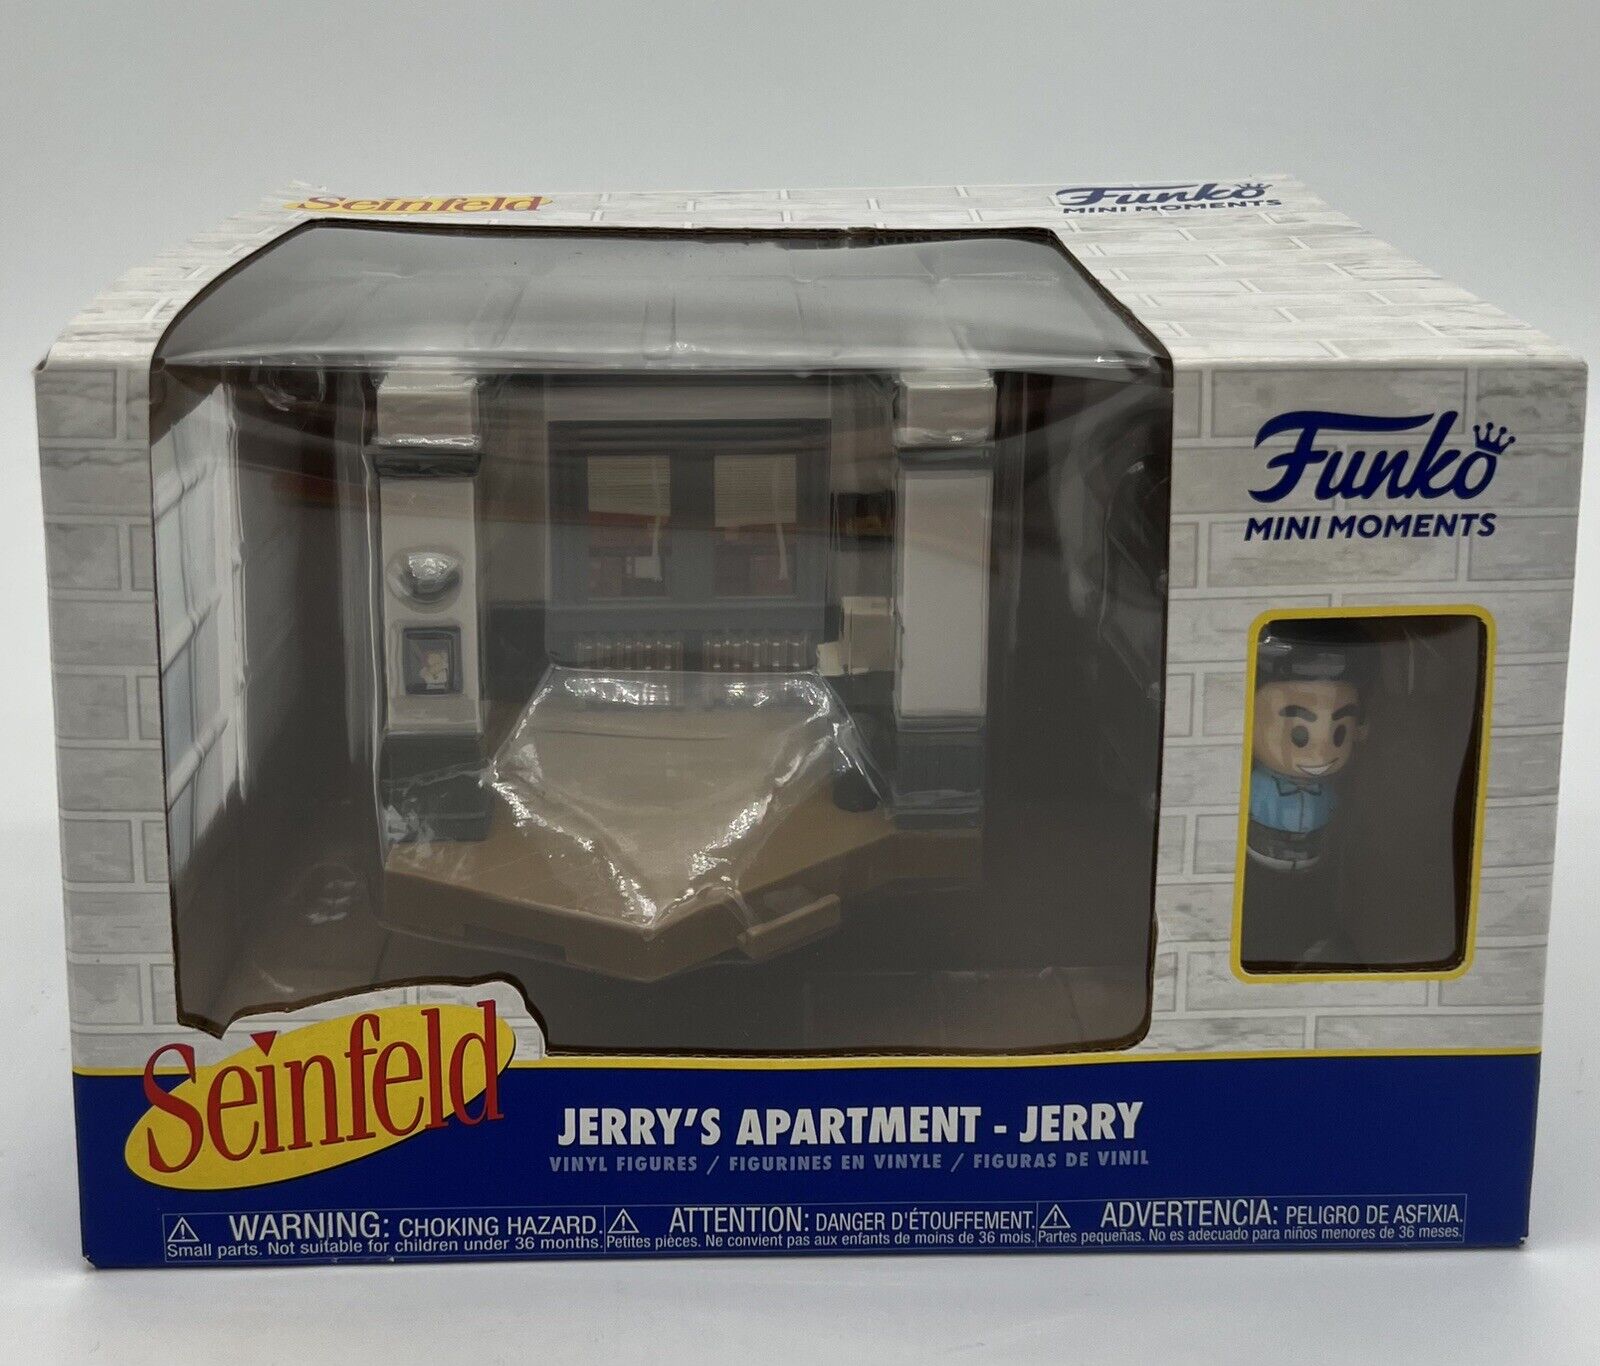 Funko Mini Moments Jerry Seinfeld Apartment With Jerry. New In Box.